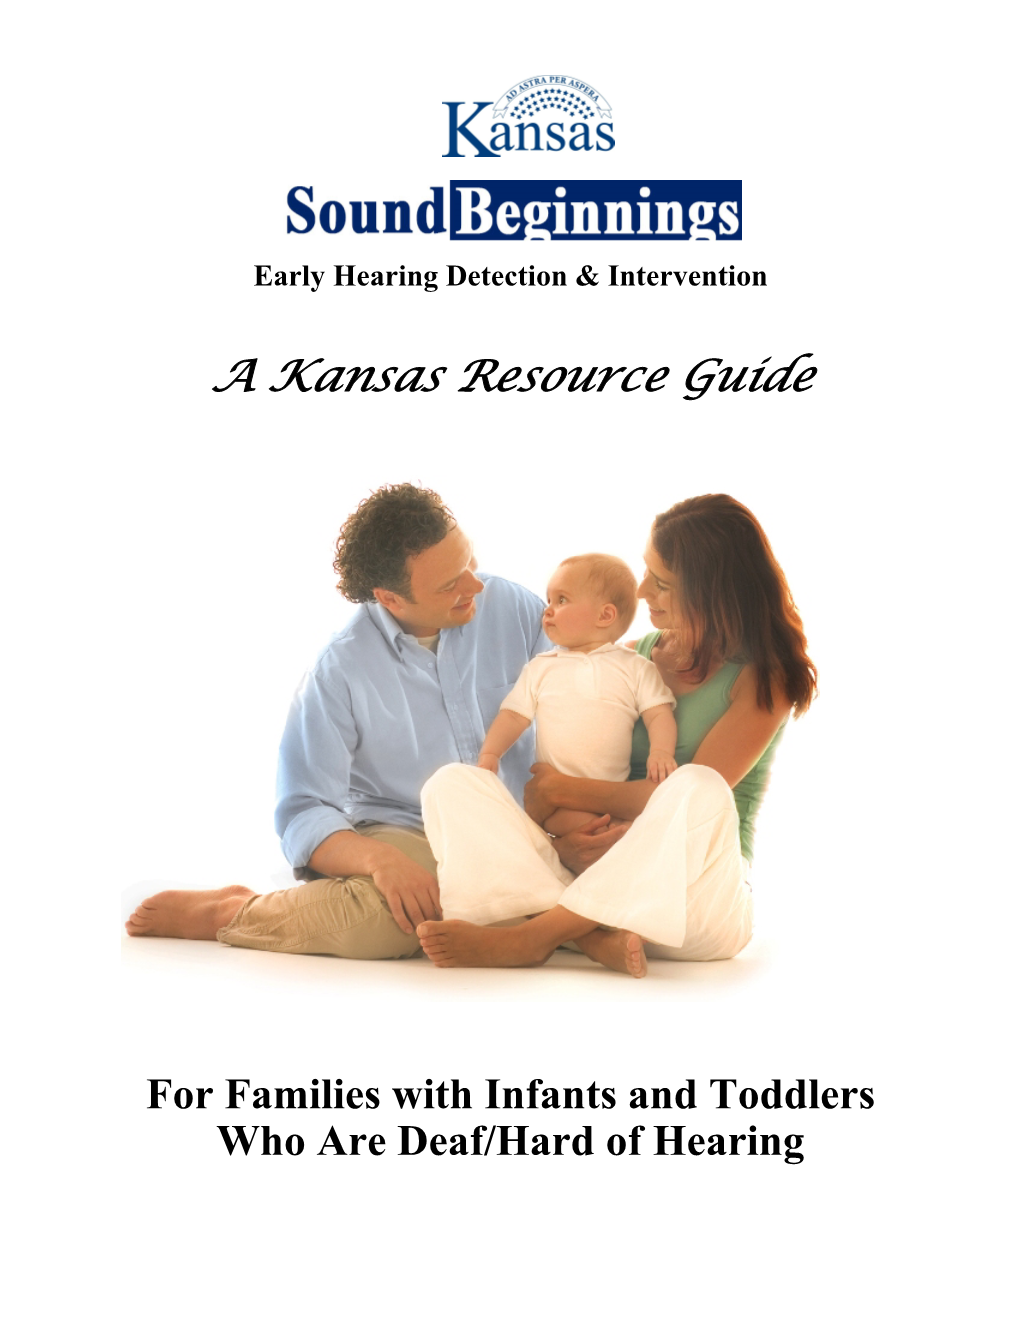 Kansas Resource Guide for Families with Infants and Toddlers Who Are